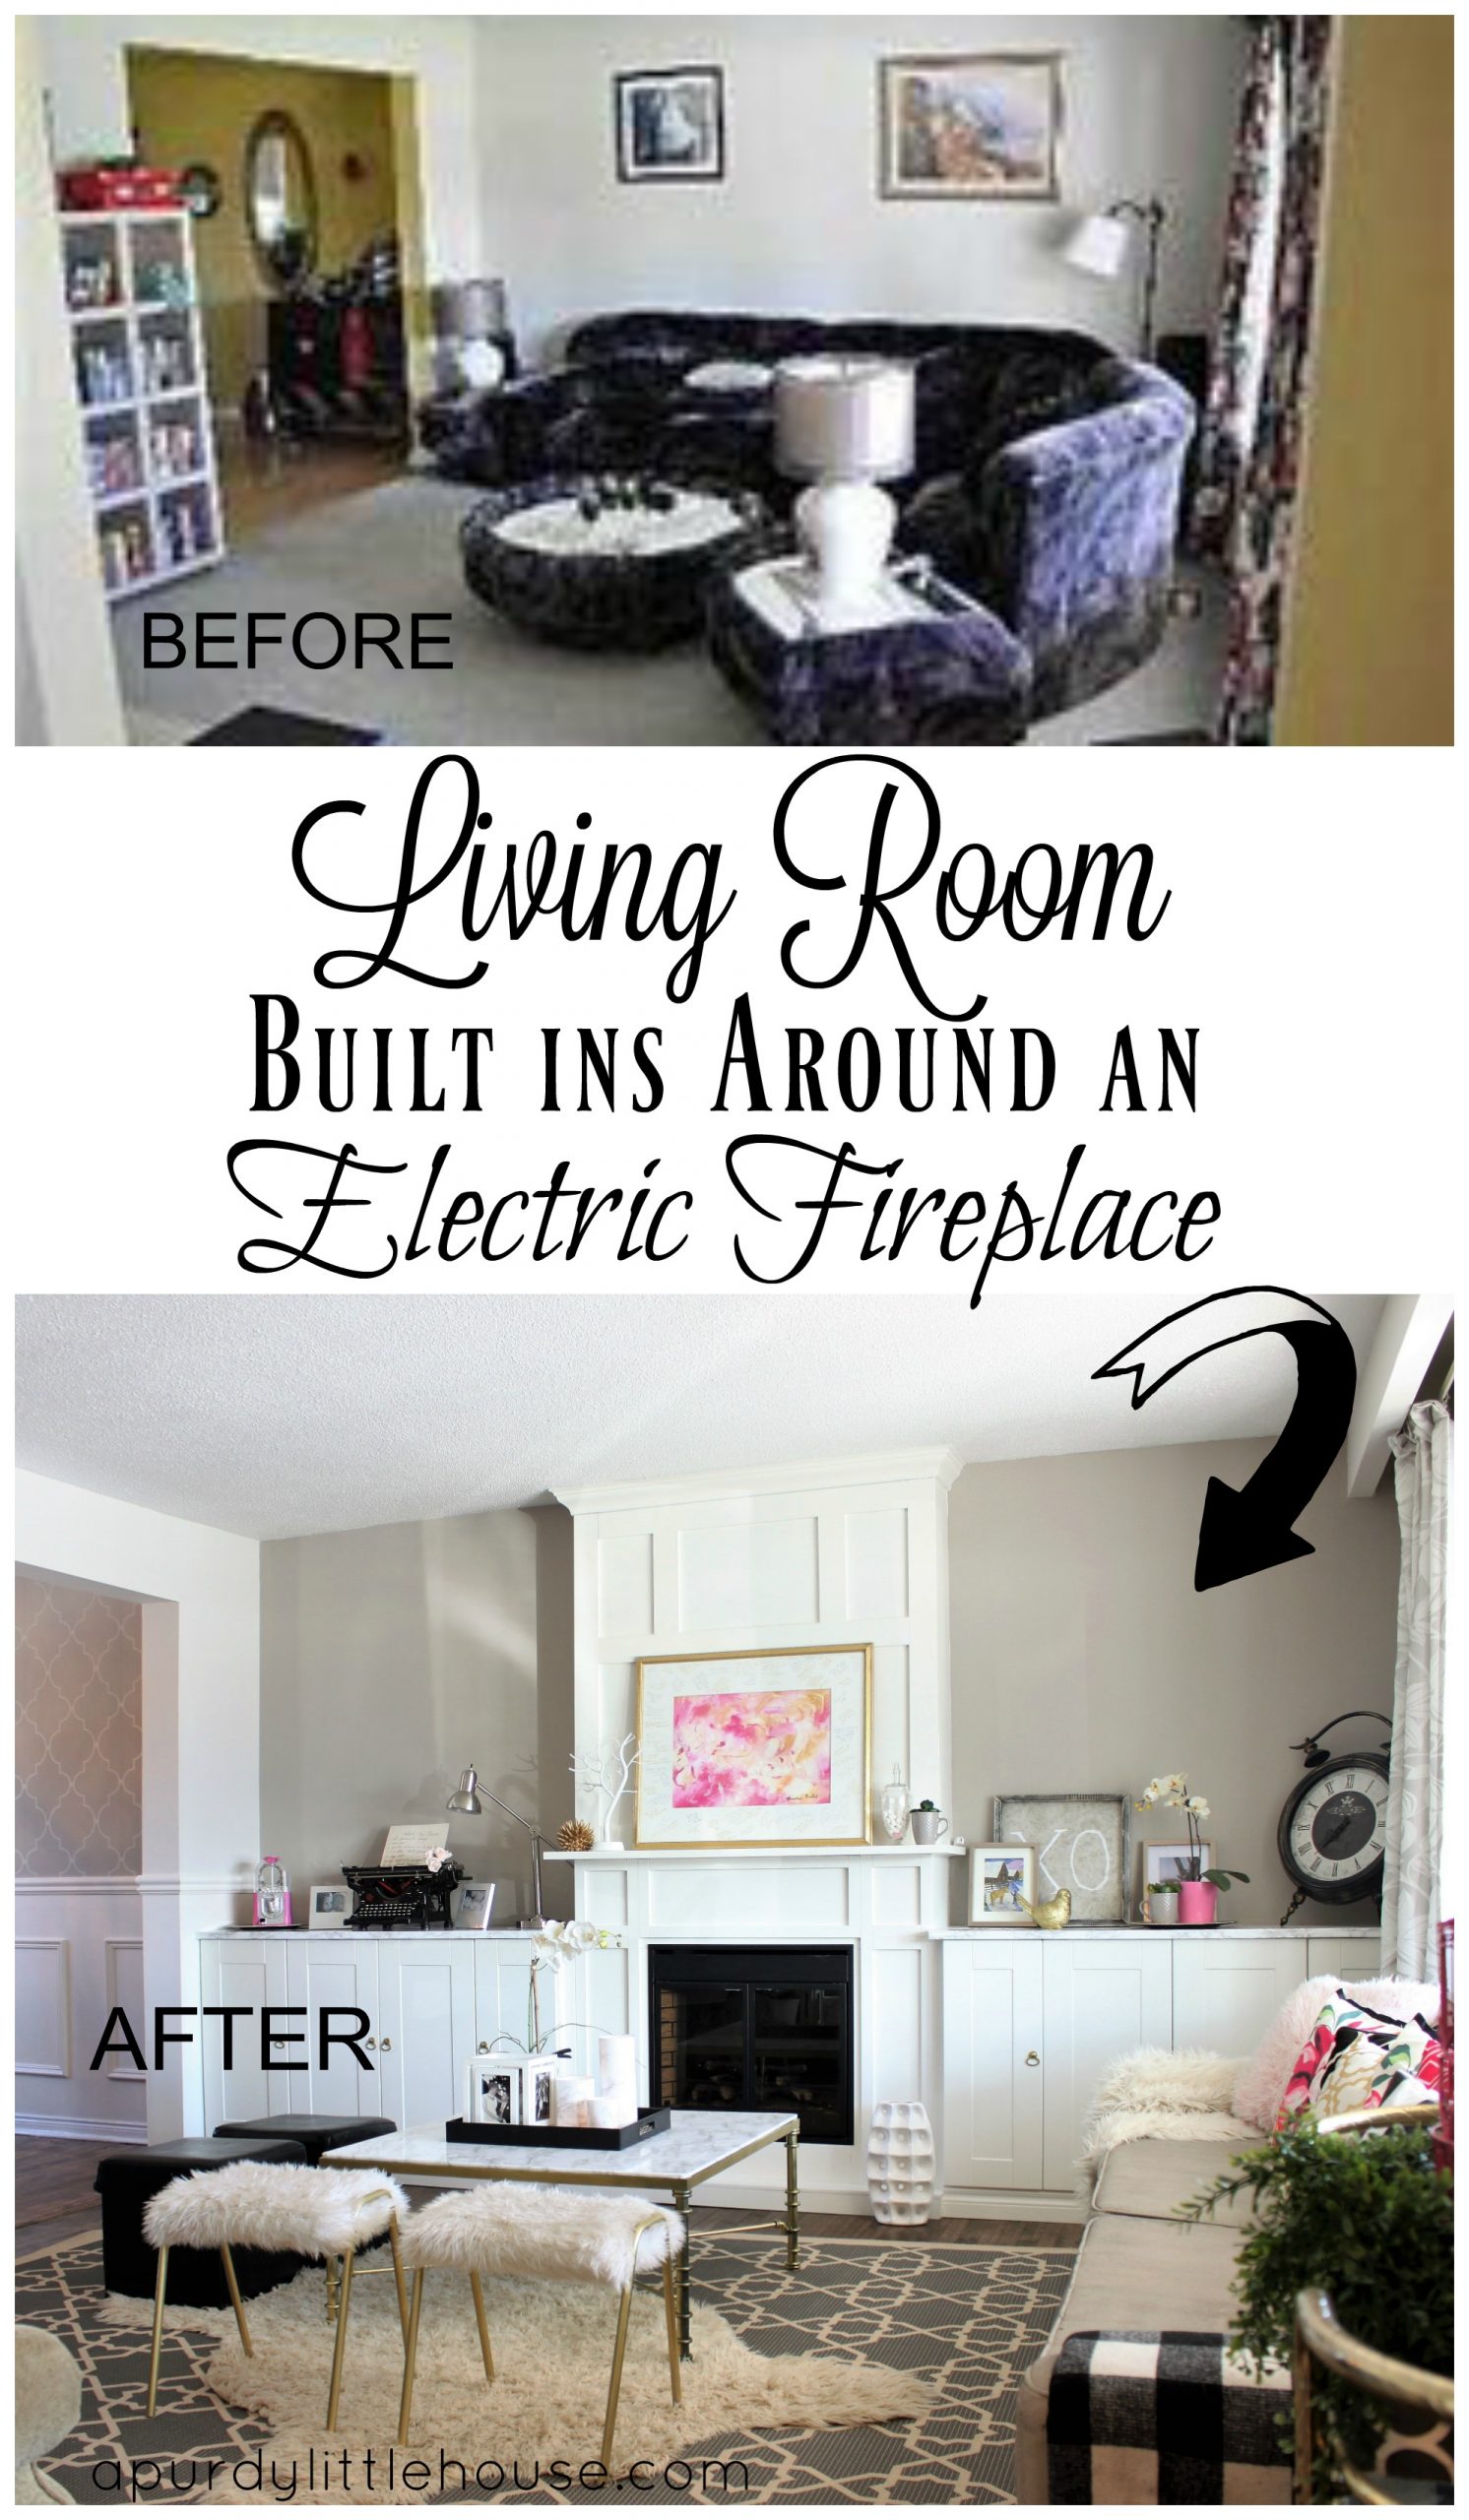 Electric Fireplace with Bookshelf Fresh Living Room Built Ins Around An Electric Fireplace